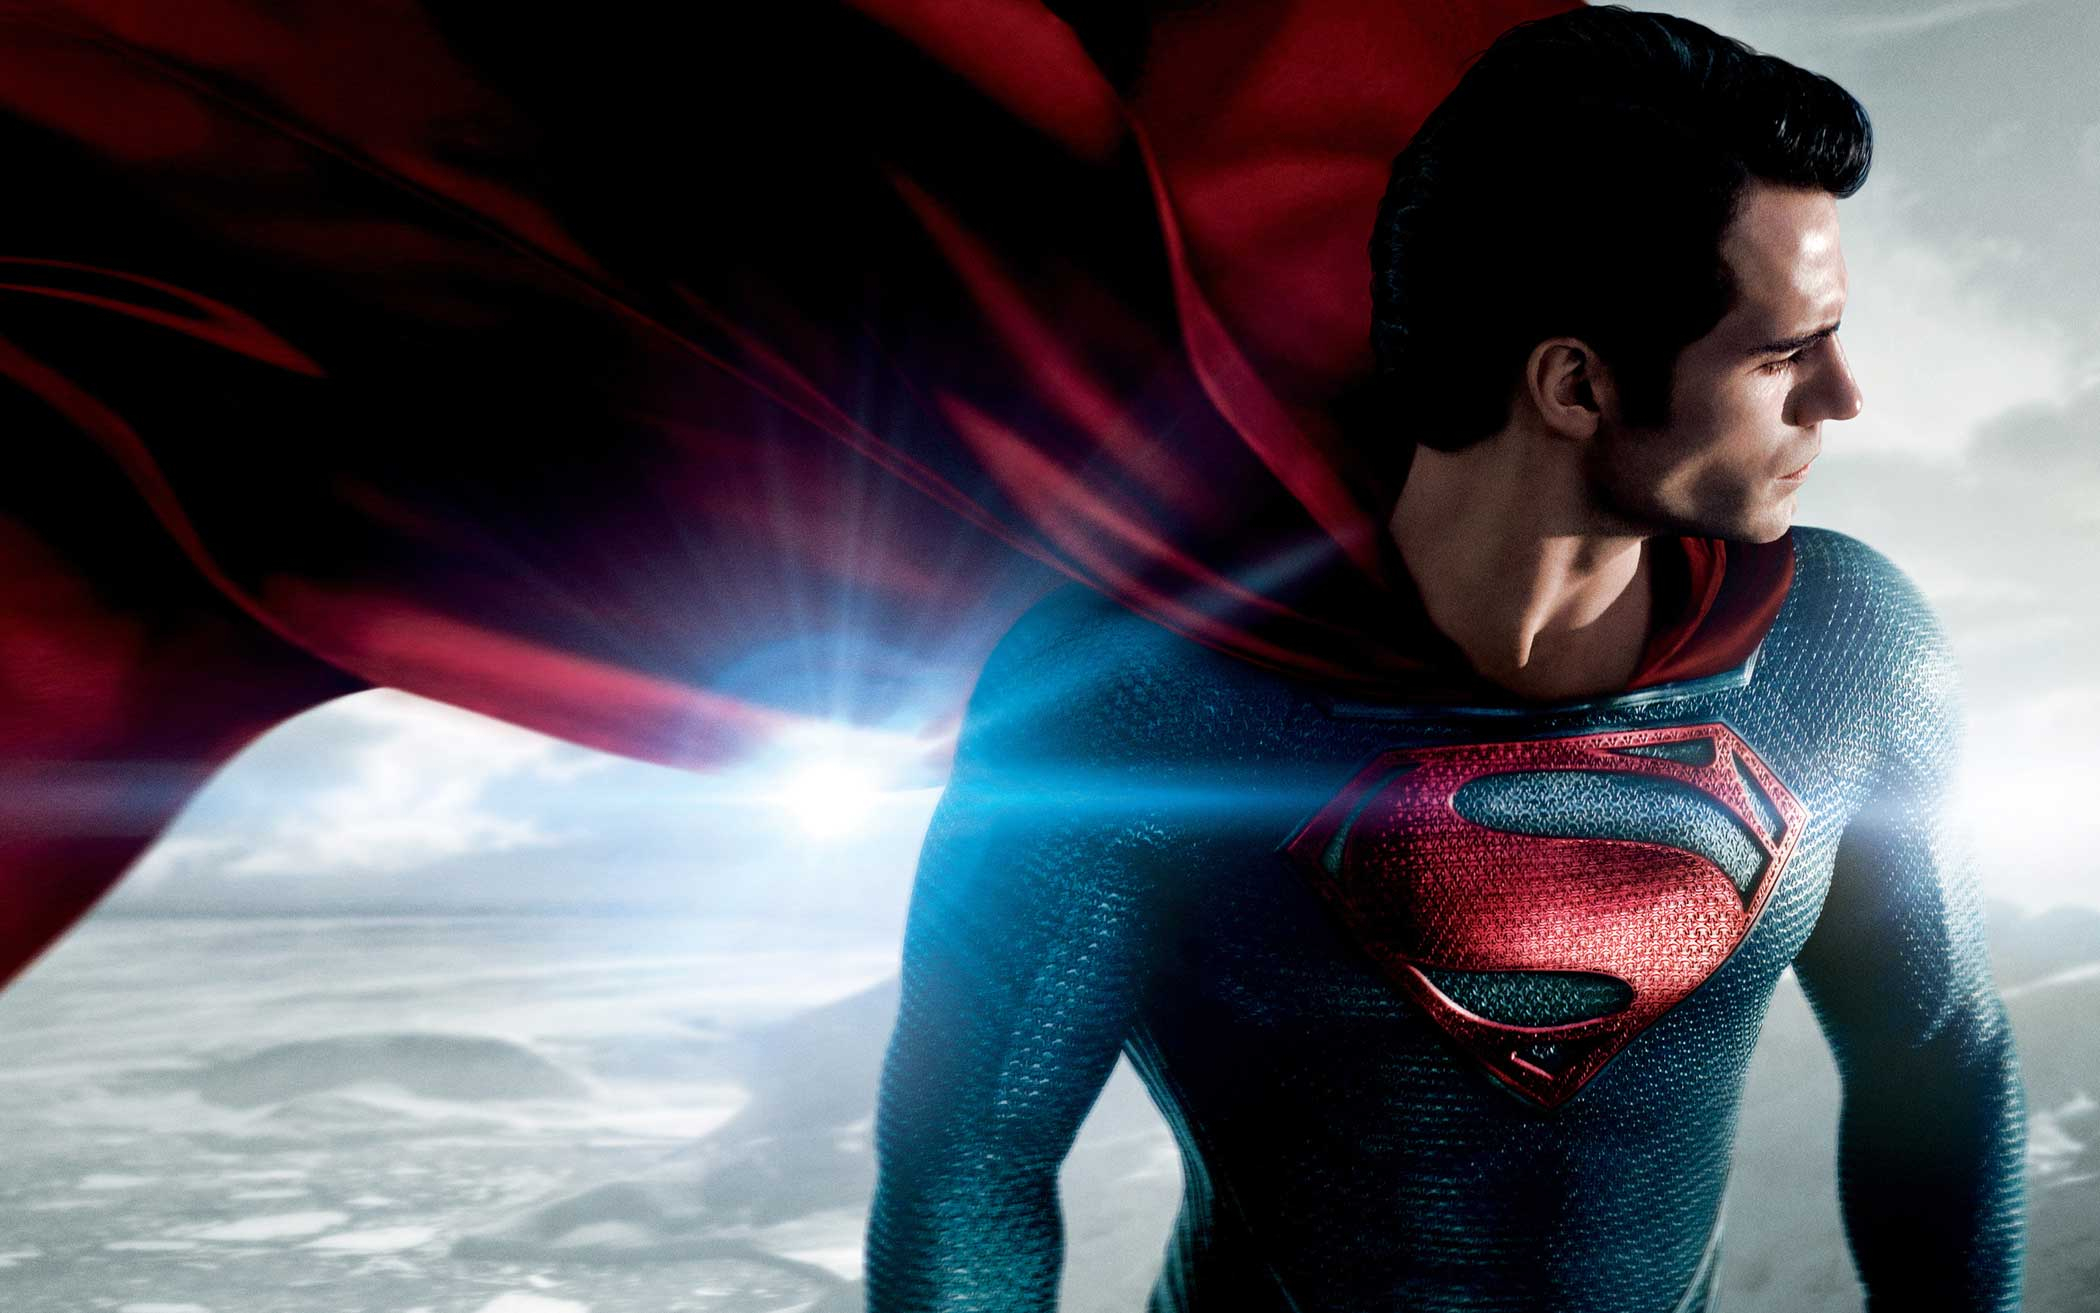 2100x1313 Man of Zeal: Studio urges churches to use new Superman film as preaching resource | New Humanist